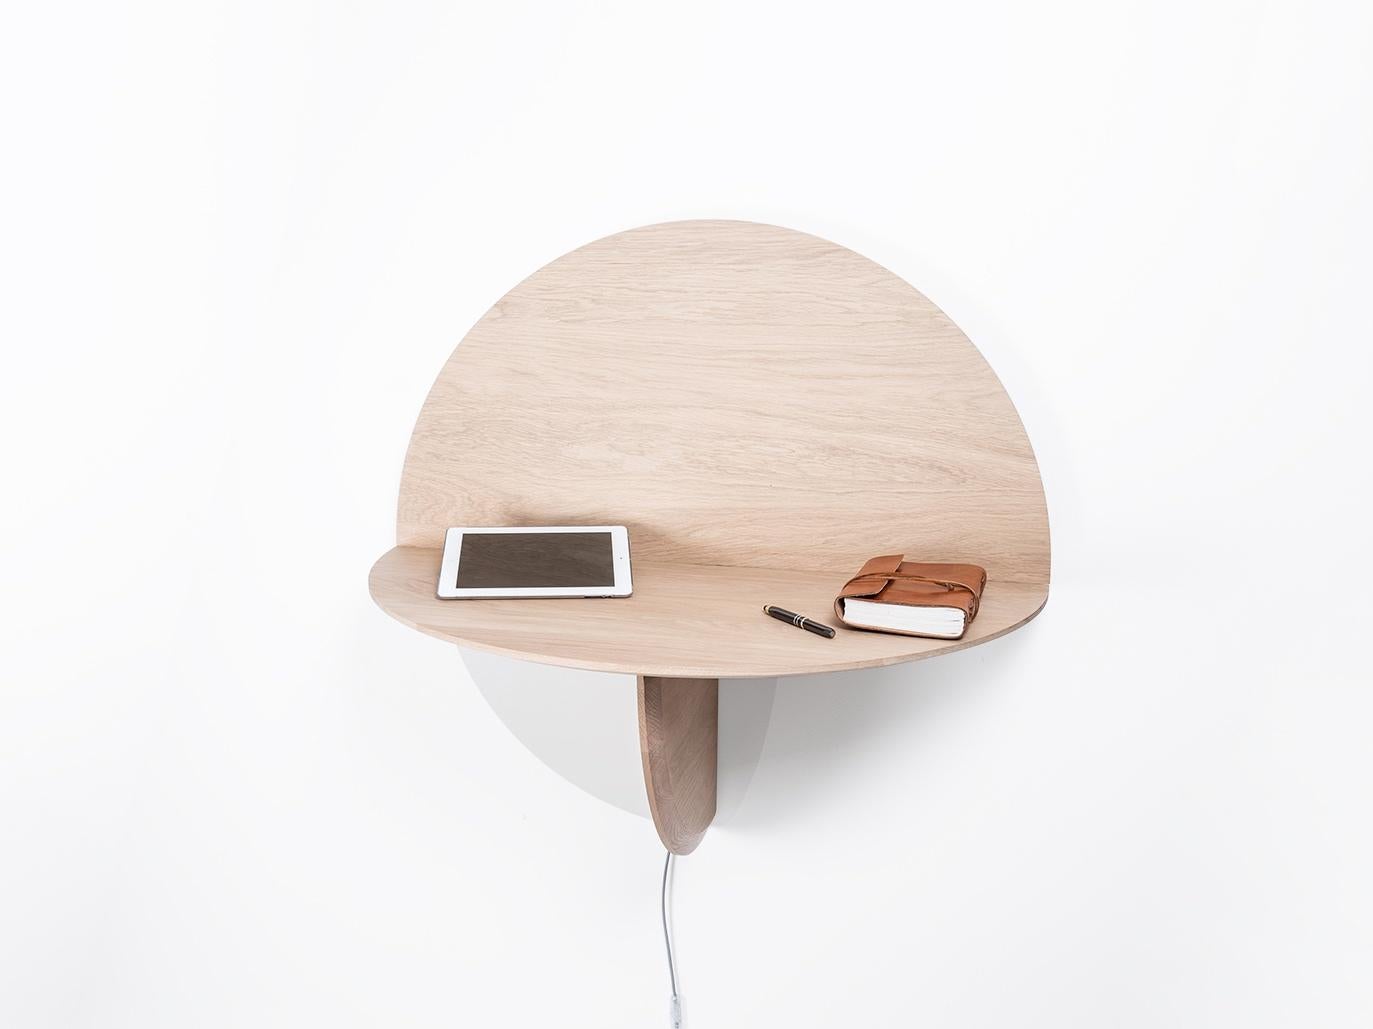 When Saturne becomes half-moon: with a beautiful decorative panel in oak, Saturne highlights the beauty of solid wood. The LED ribbon behind makes it an original wall lamp. Lifted in half-moon, it be-comes a writing desk, with space for a computer,